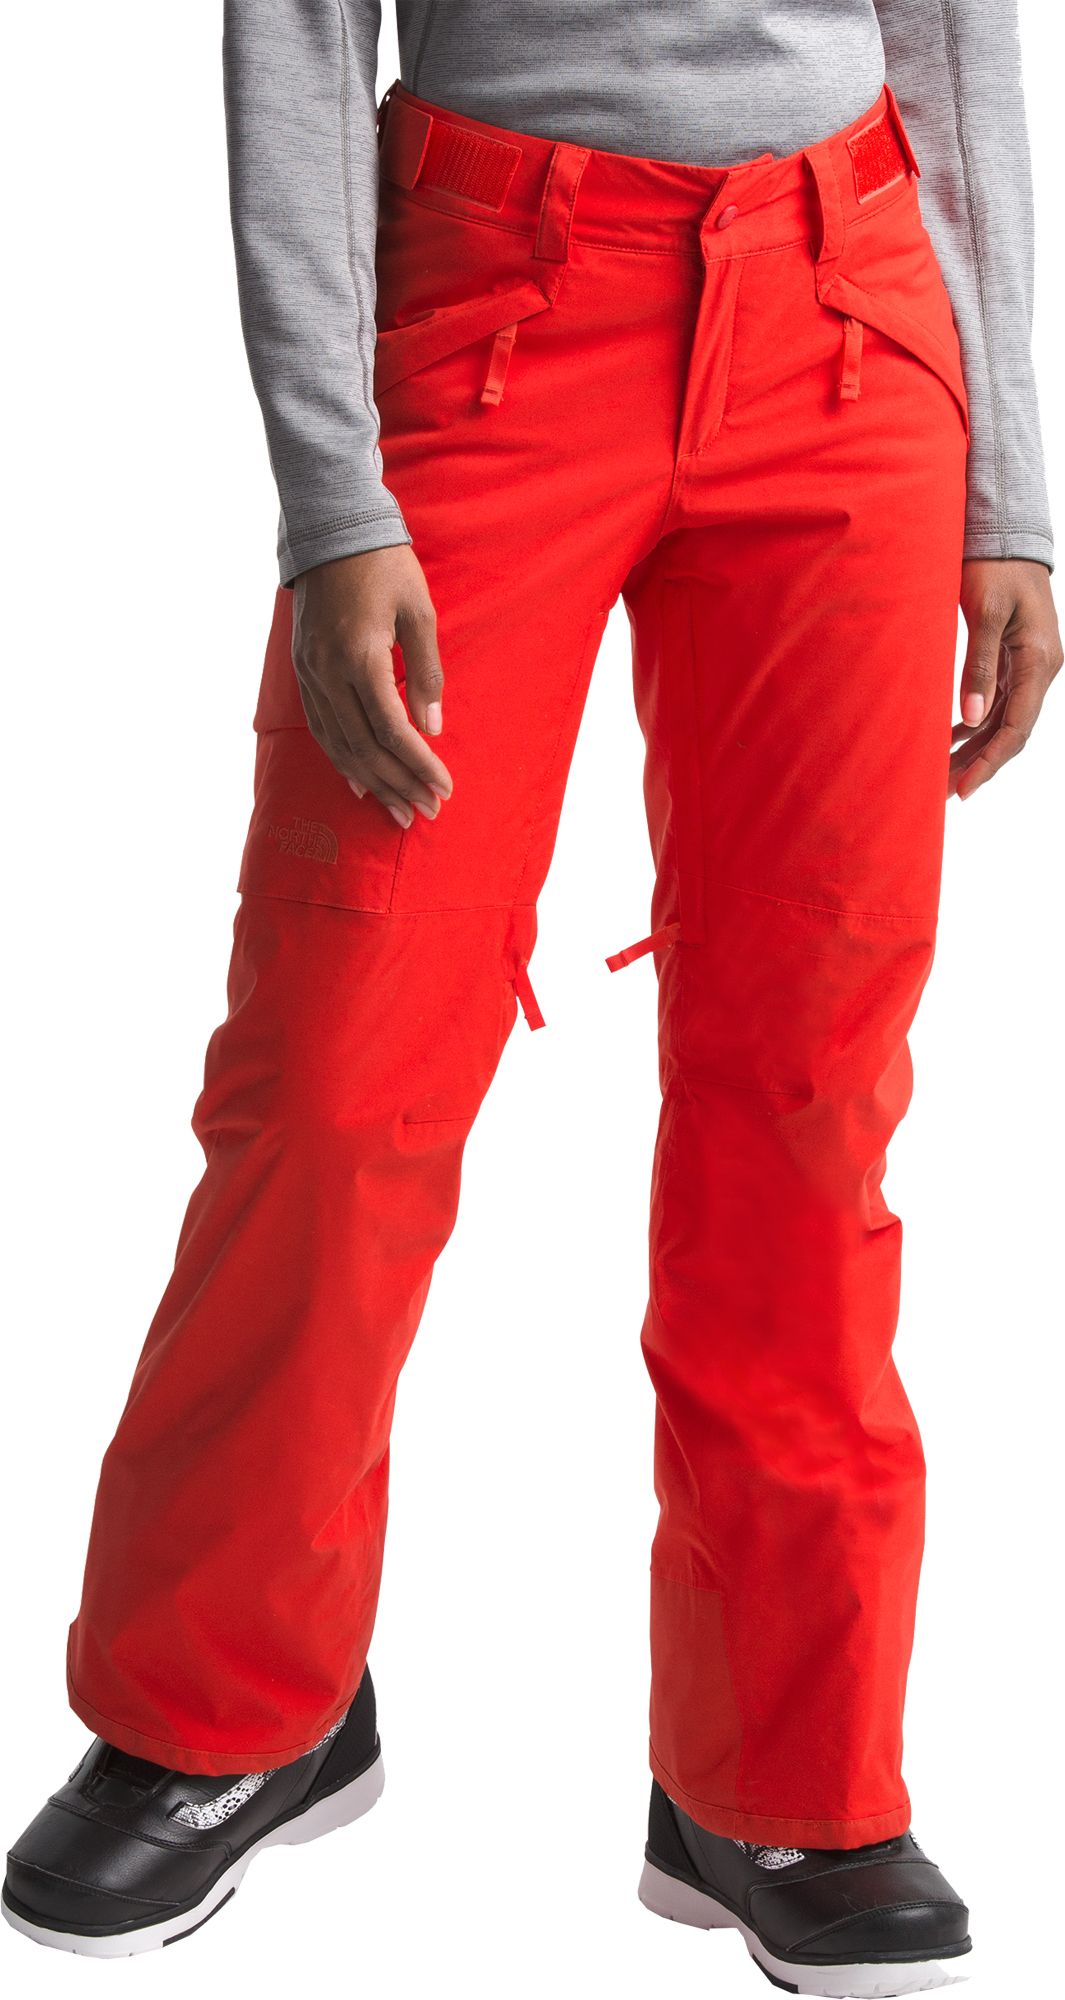 women's freedom insulated pants